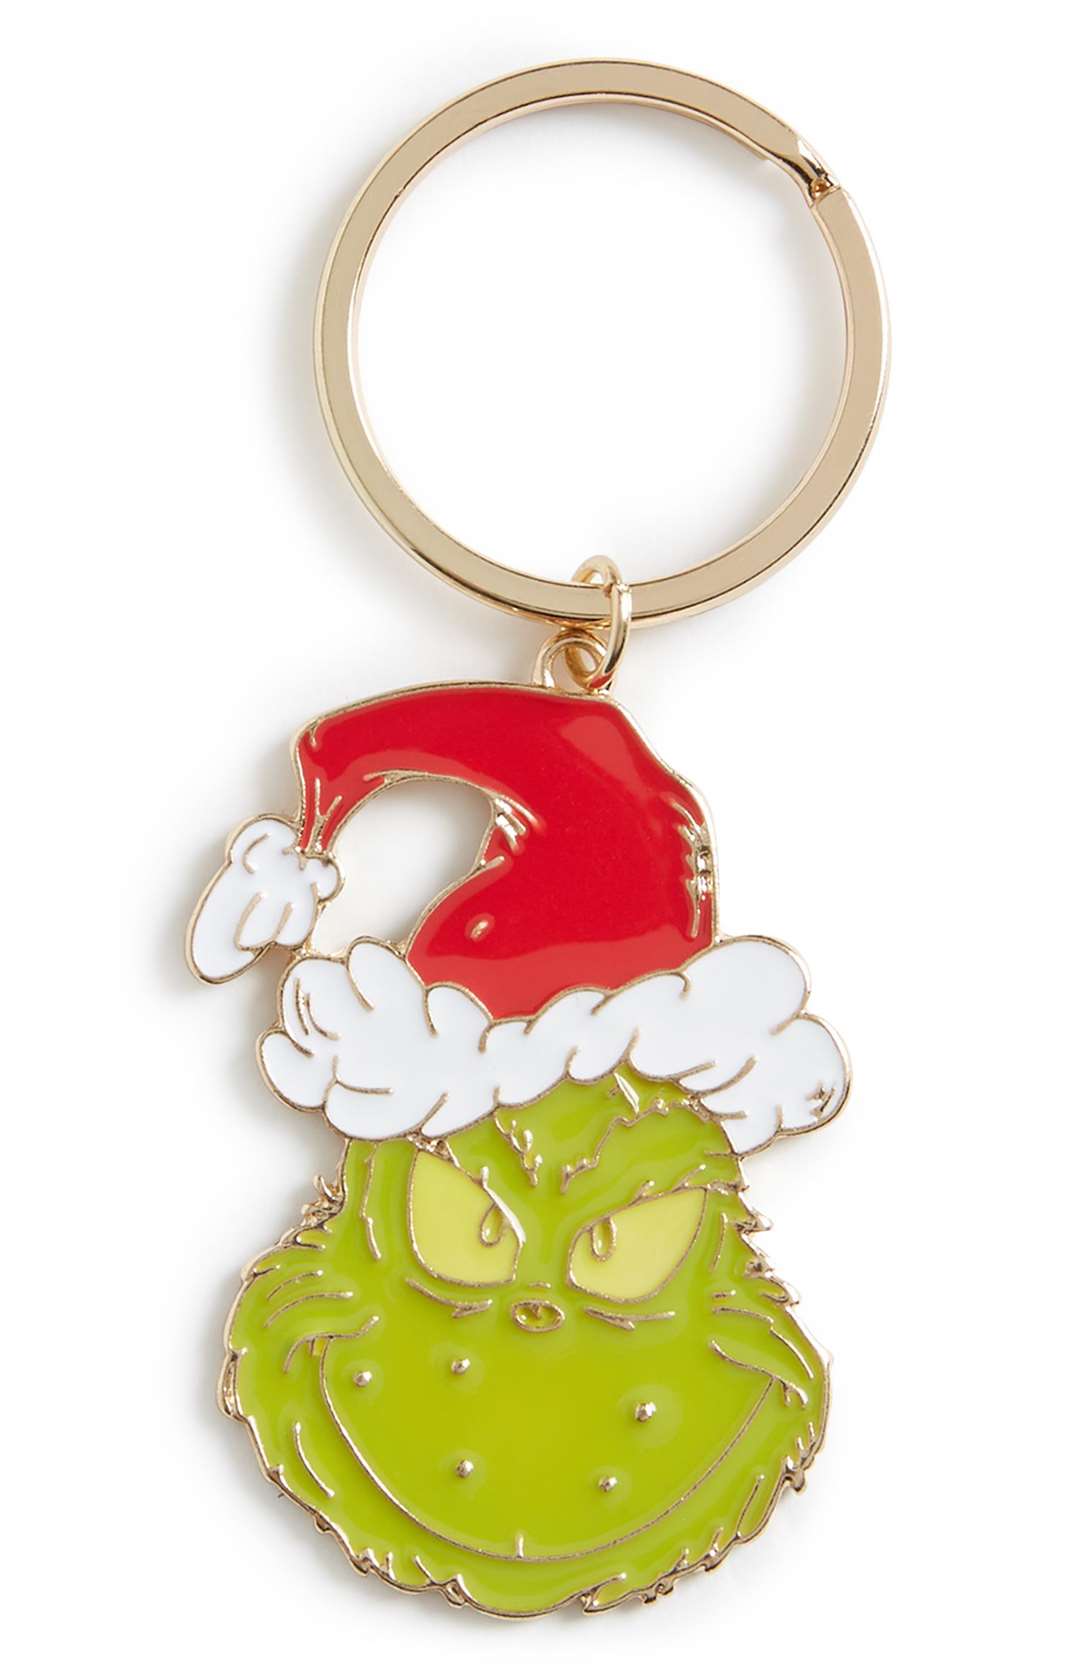 For a slice of Christmas all year round - The Grinch keyring, £3 from Primark